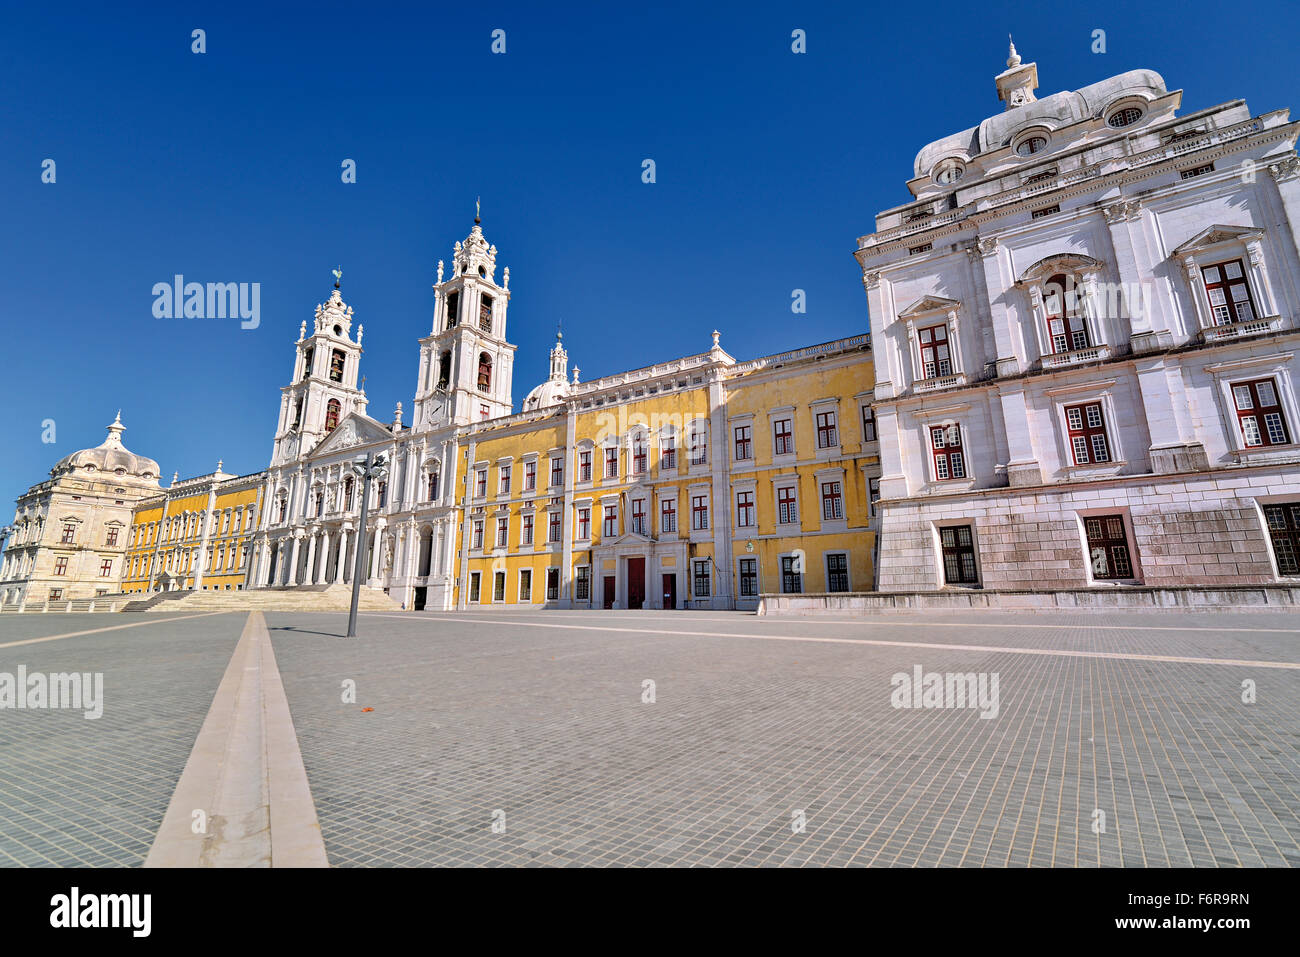 Portugal: National Palace and Monastery of Mafra Stock Photo